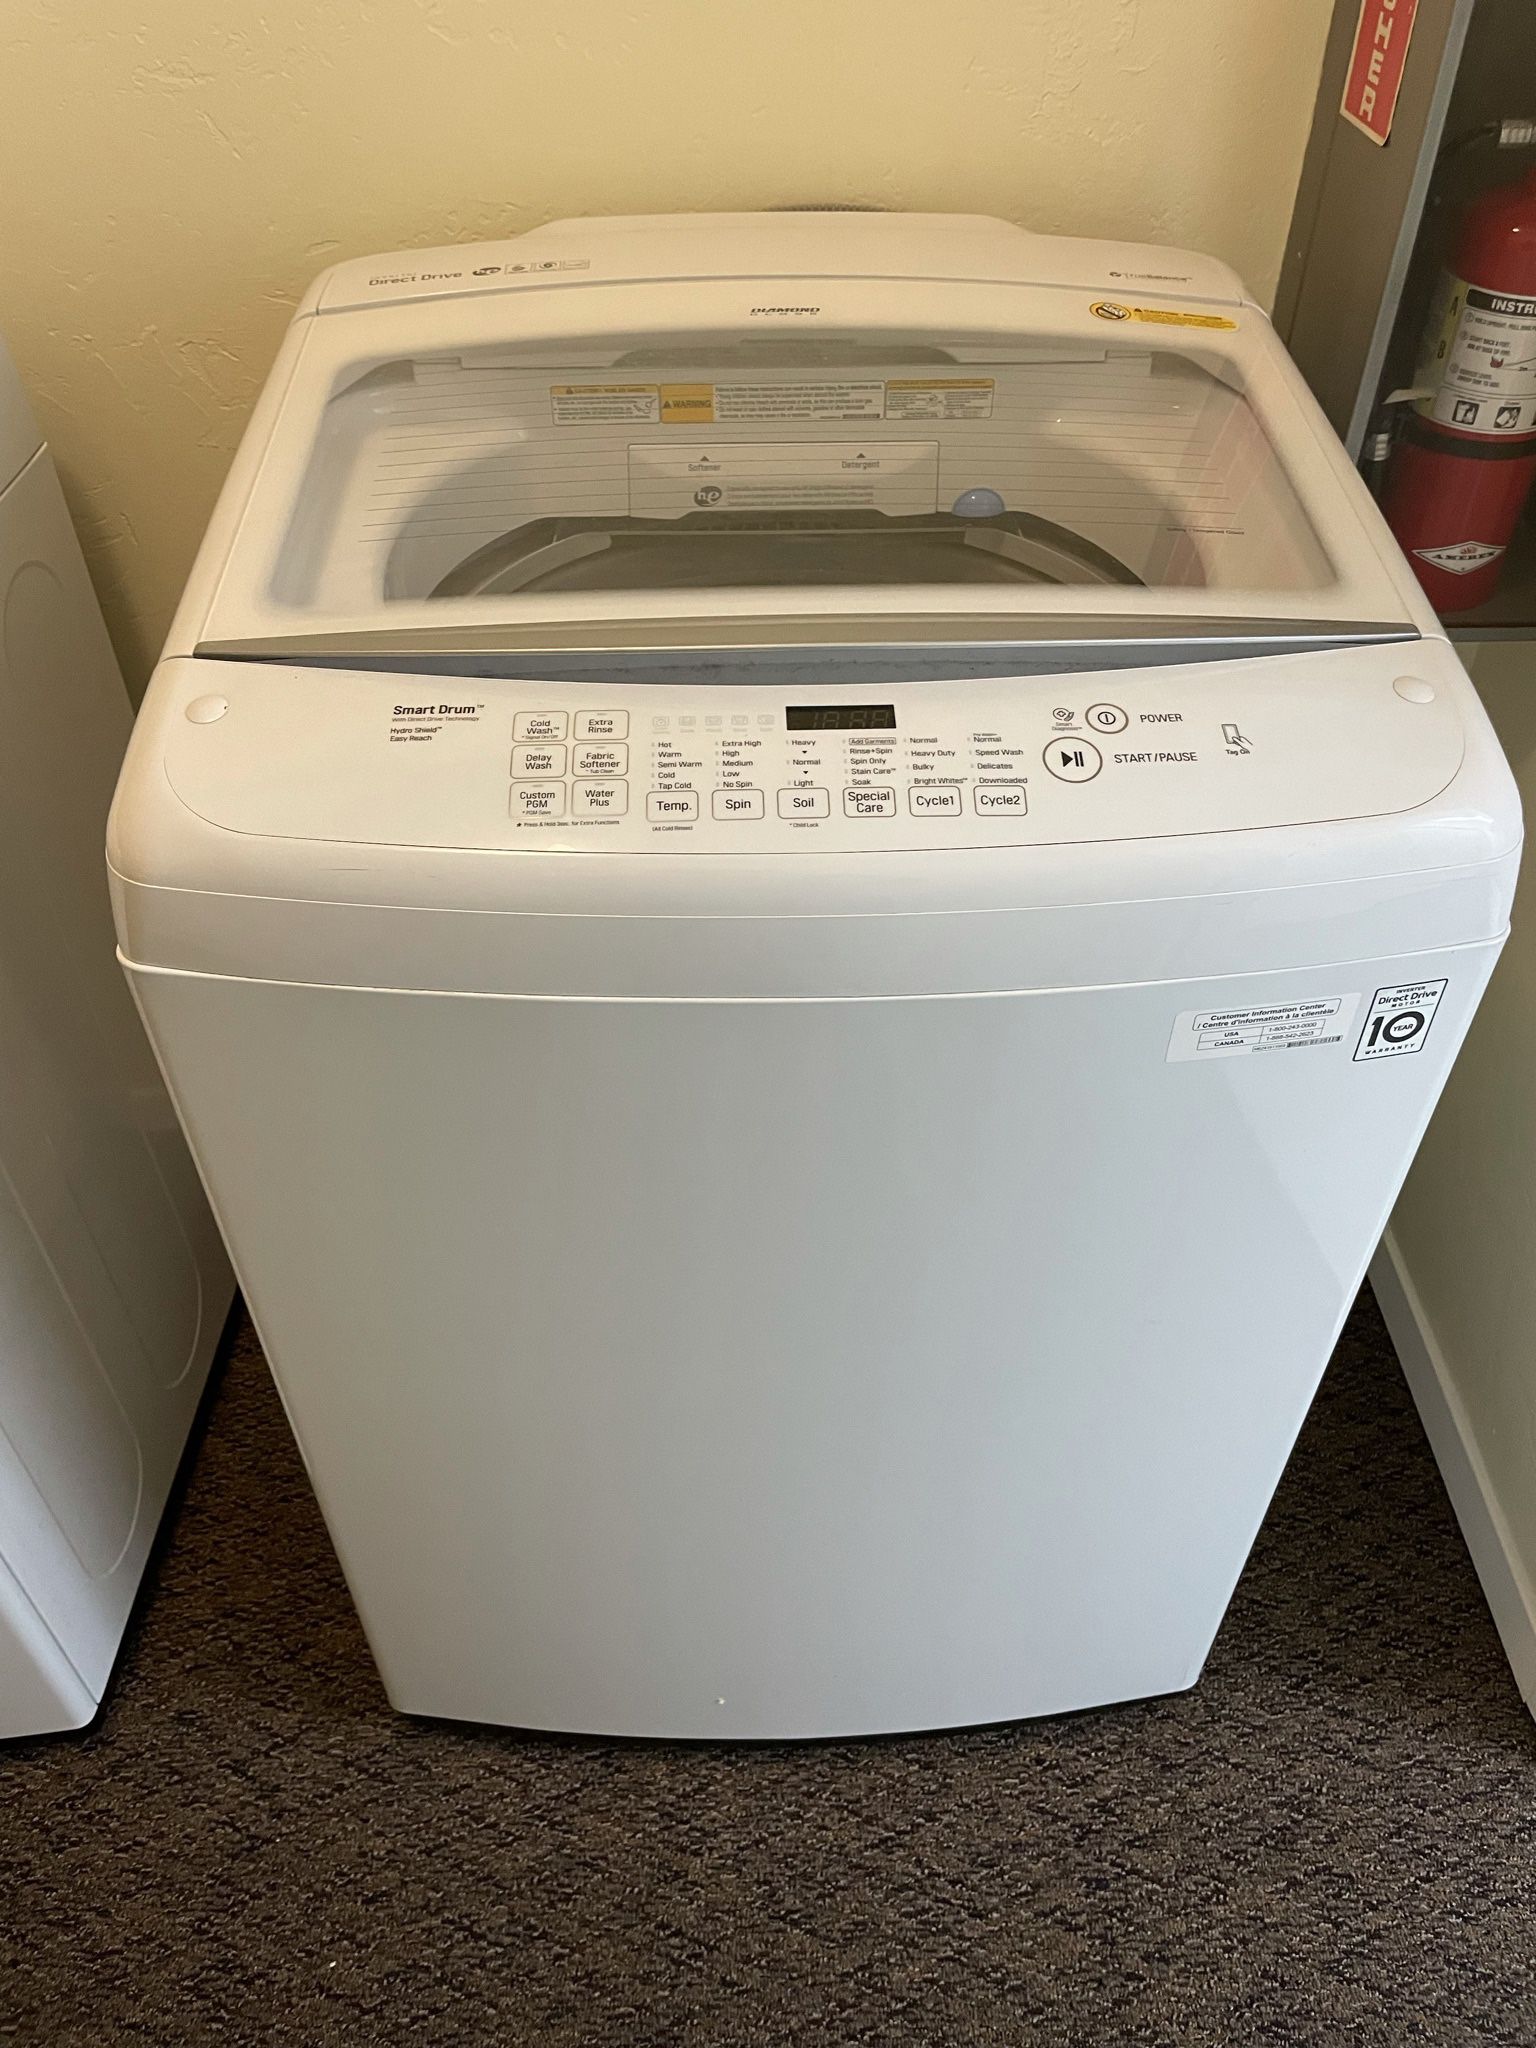 WT1501CW 4.5 cu. ft. Ultra Large Capacity Top Load Washer with Front Control Design